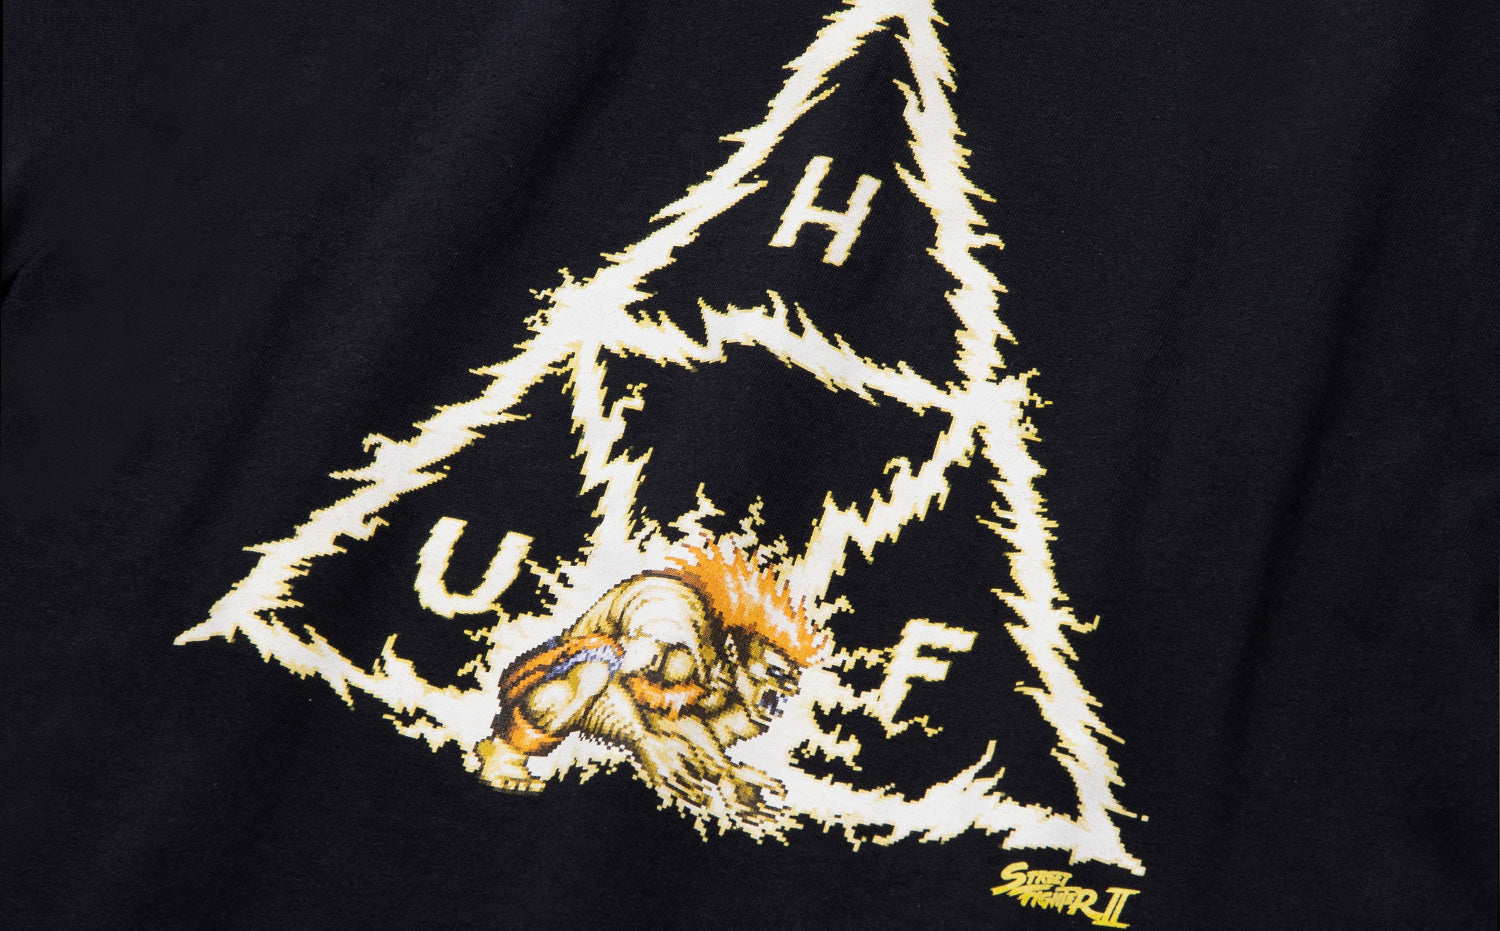 Shop the HUF Worldwide x Street Fighter Collaboration at Fallen Front